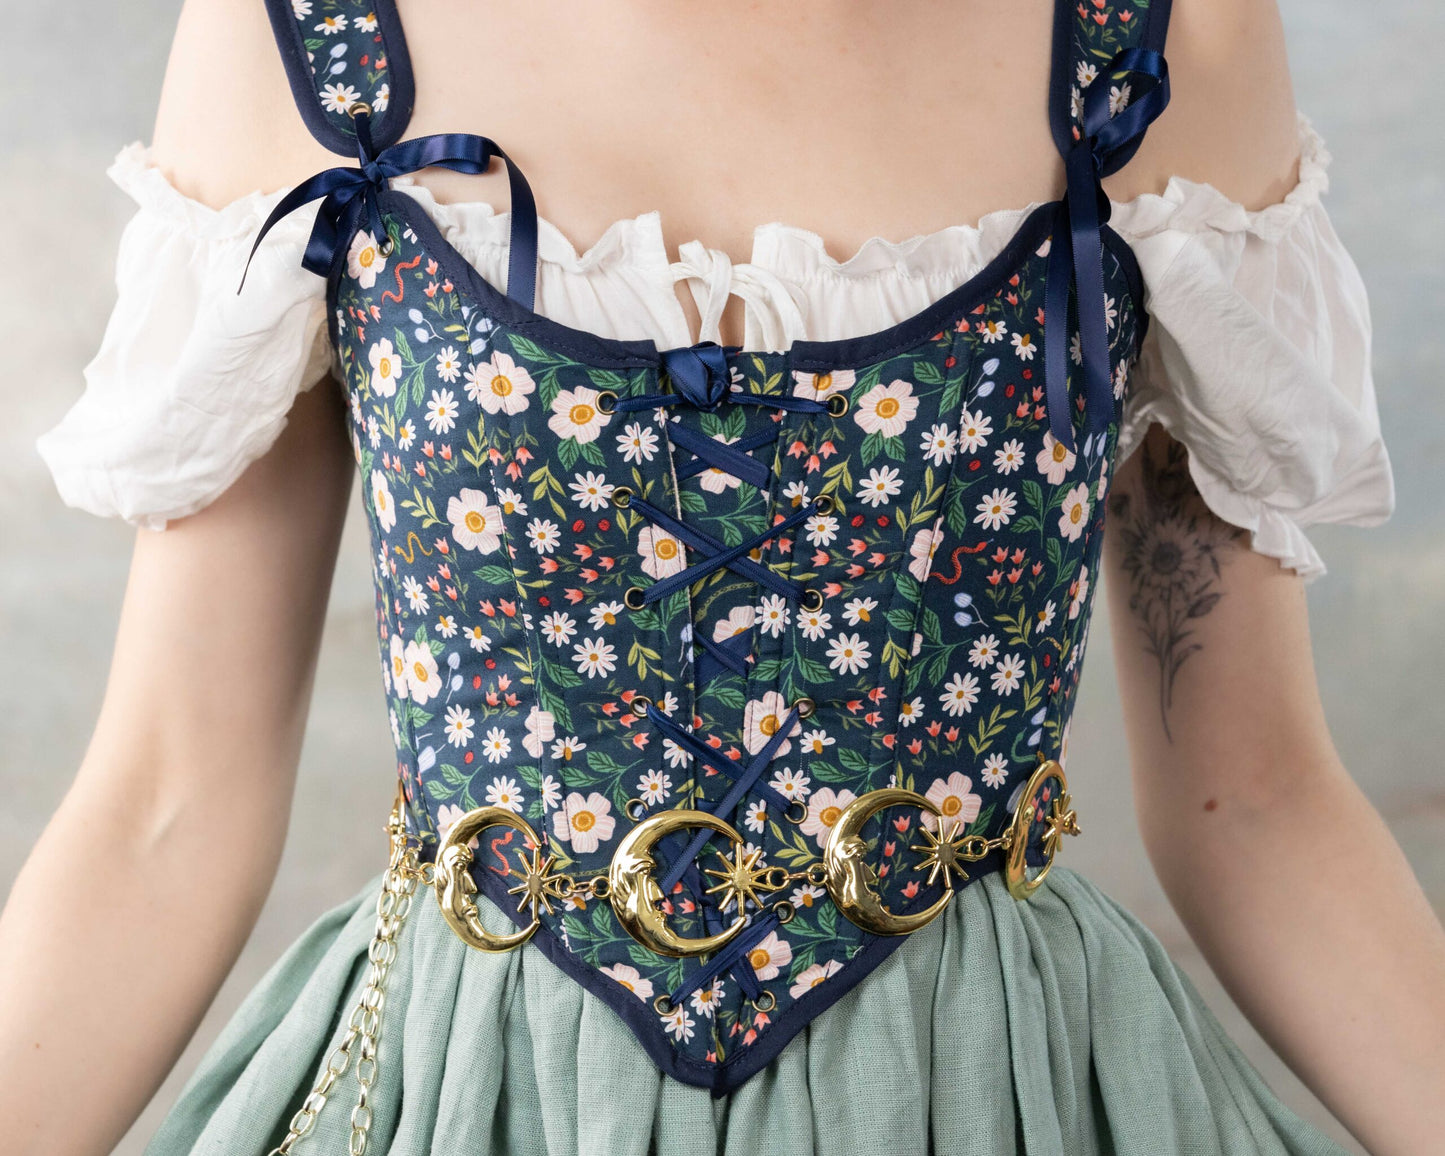 Load image into Gallery viewer, Garden Snakes Blue Floral Renaissance Bodice
